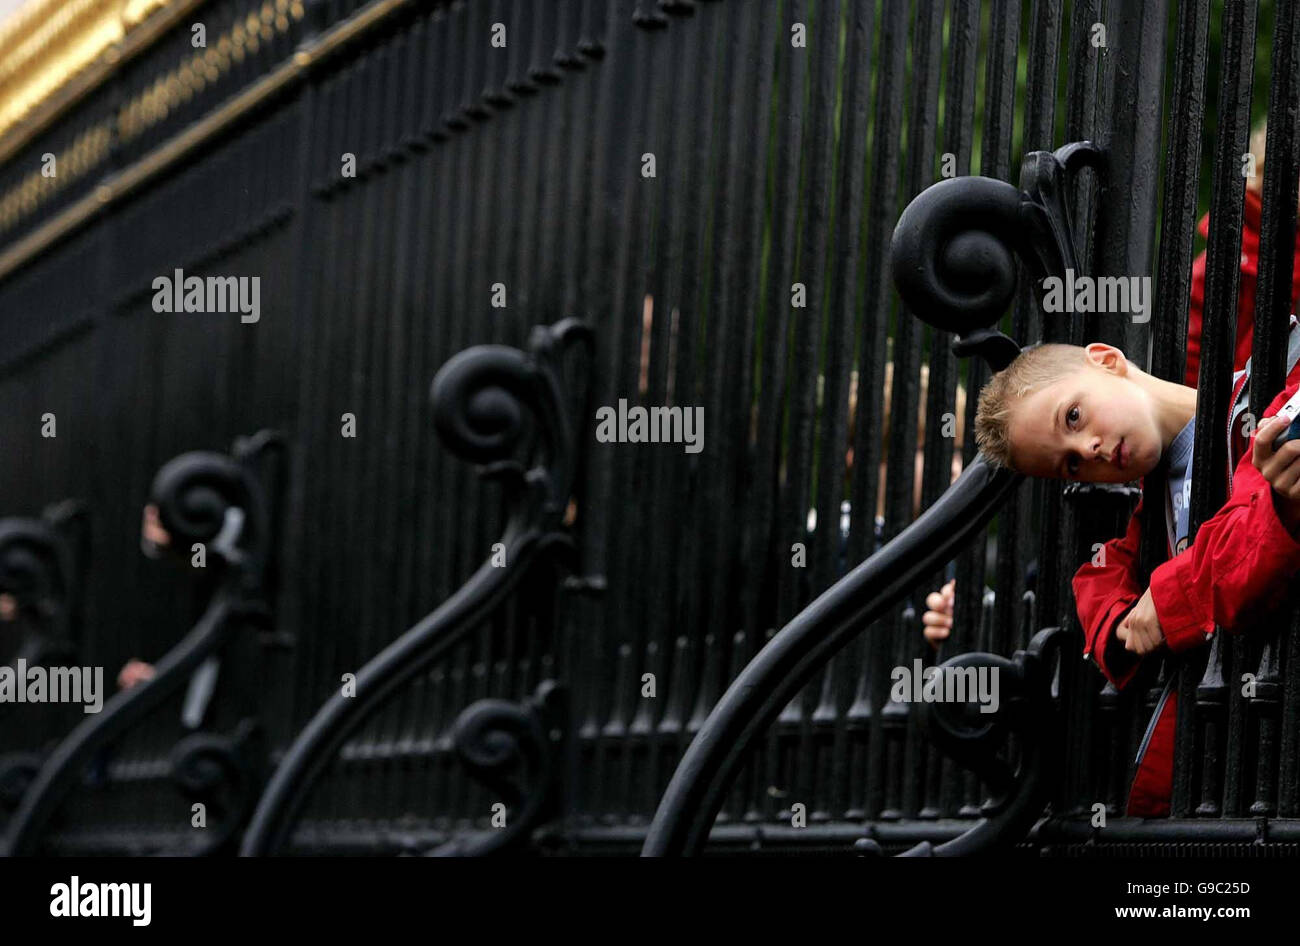 An un-identified child puts his head through the railings of Buckingham Palace, London, to get a better view of the Changing of the Guard. Stock Photo